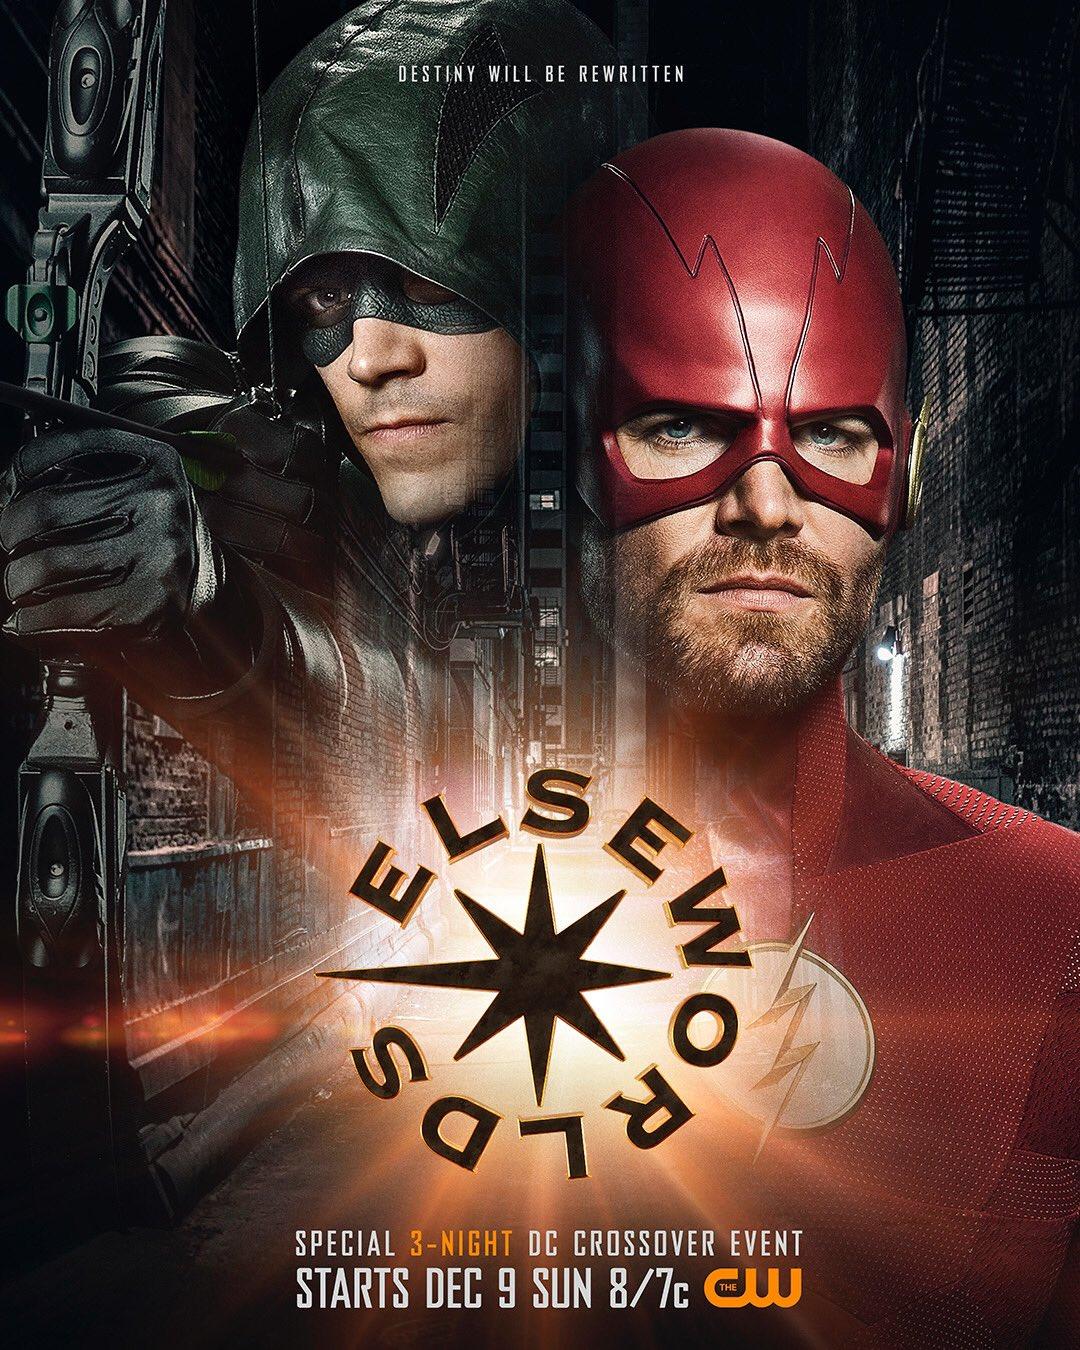 Arrowverse Elseworlds Crossover Poster Shows Flash and Arrow Switch